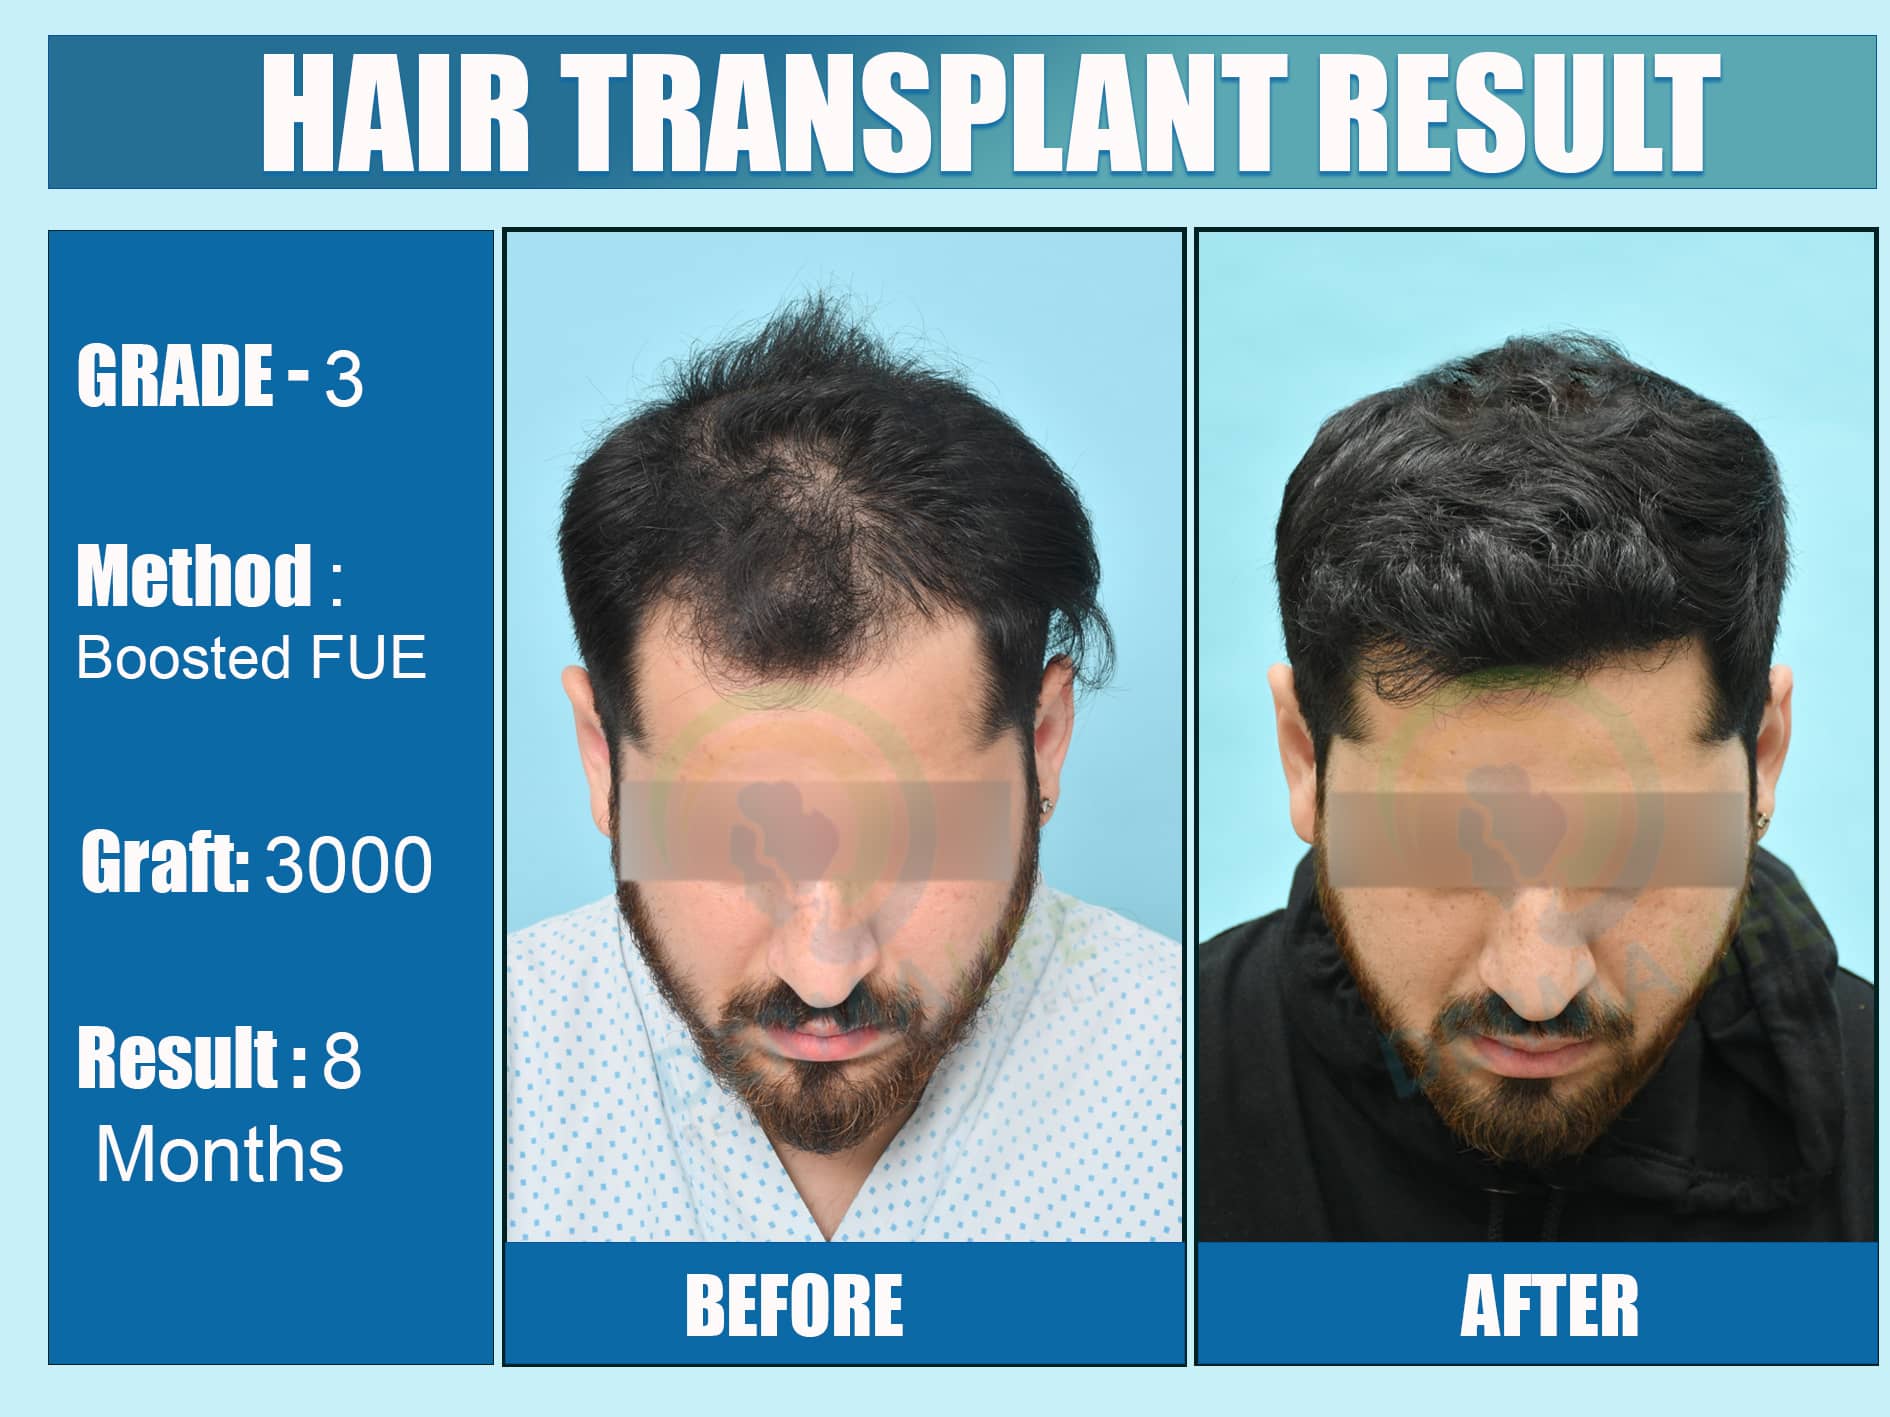 Before and After Results of Hair Transplant for Norwood Grade 3